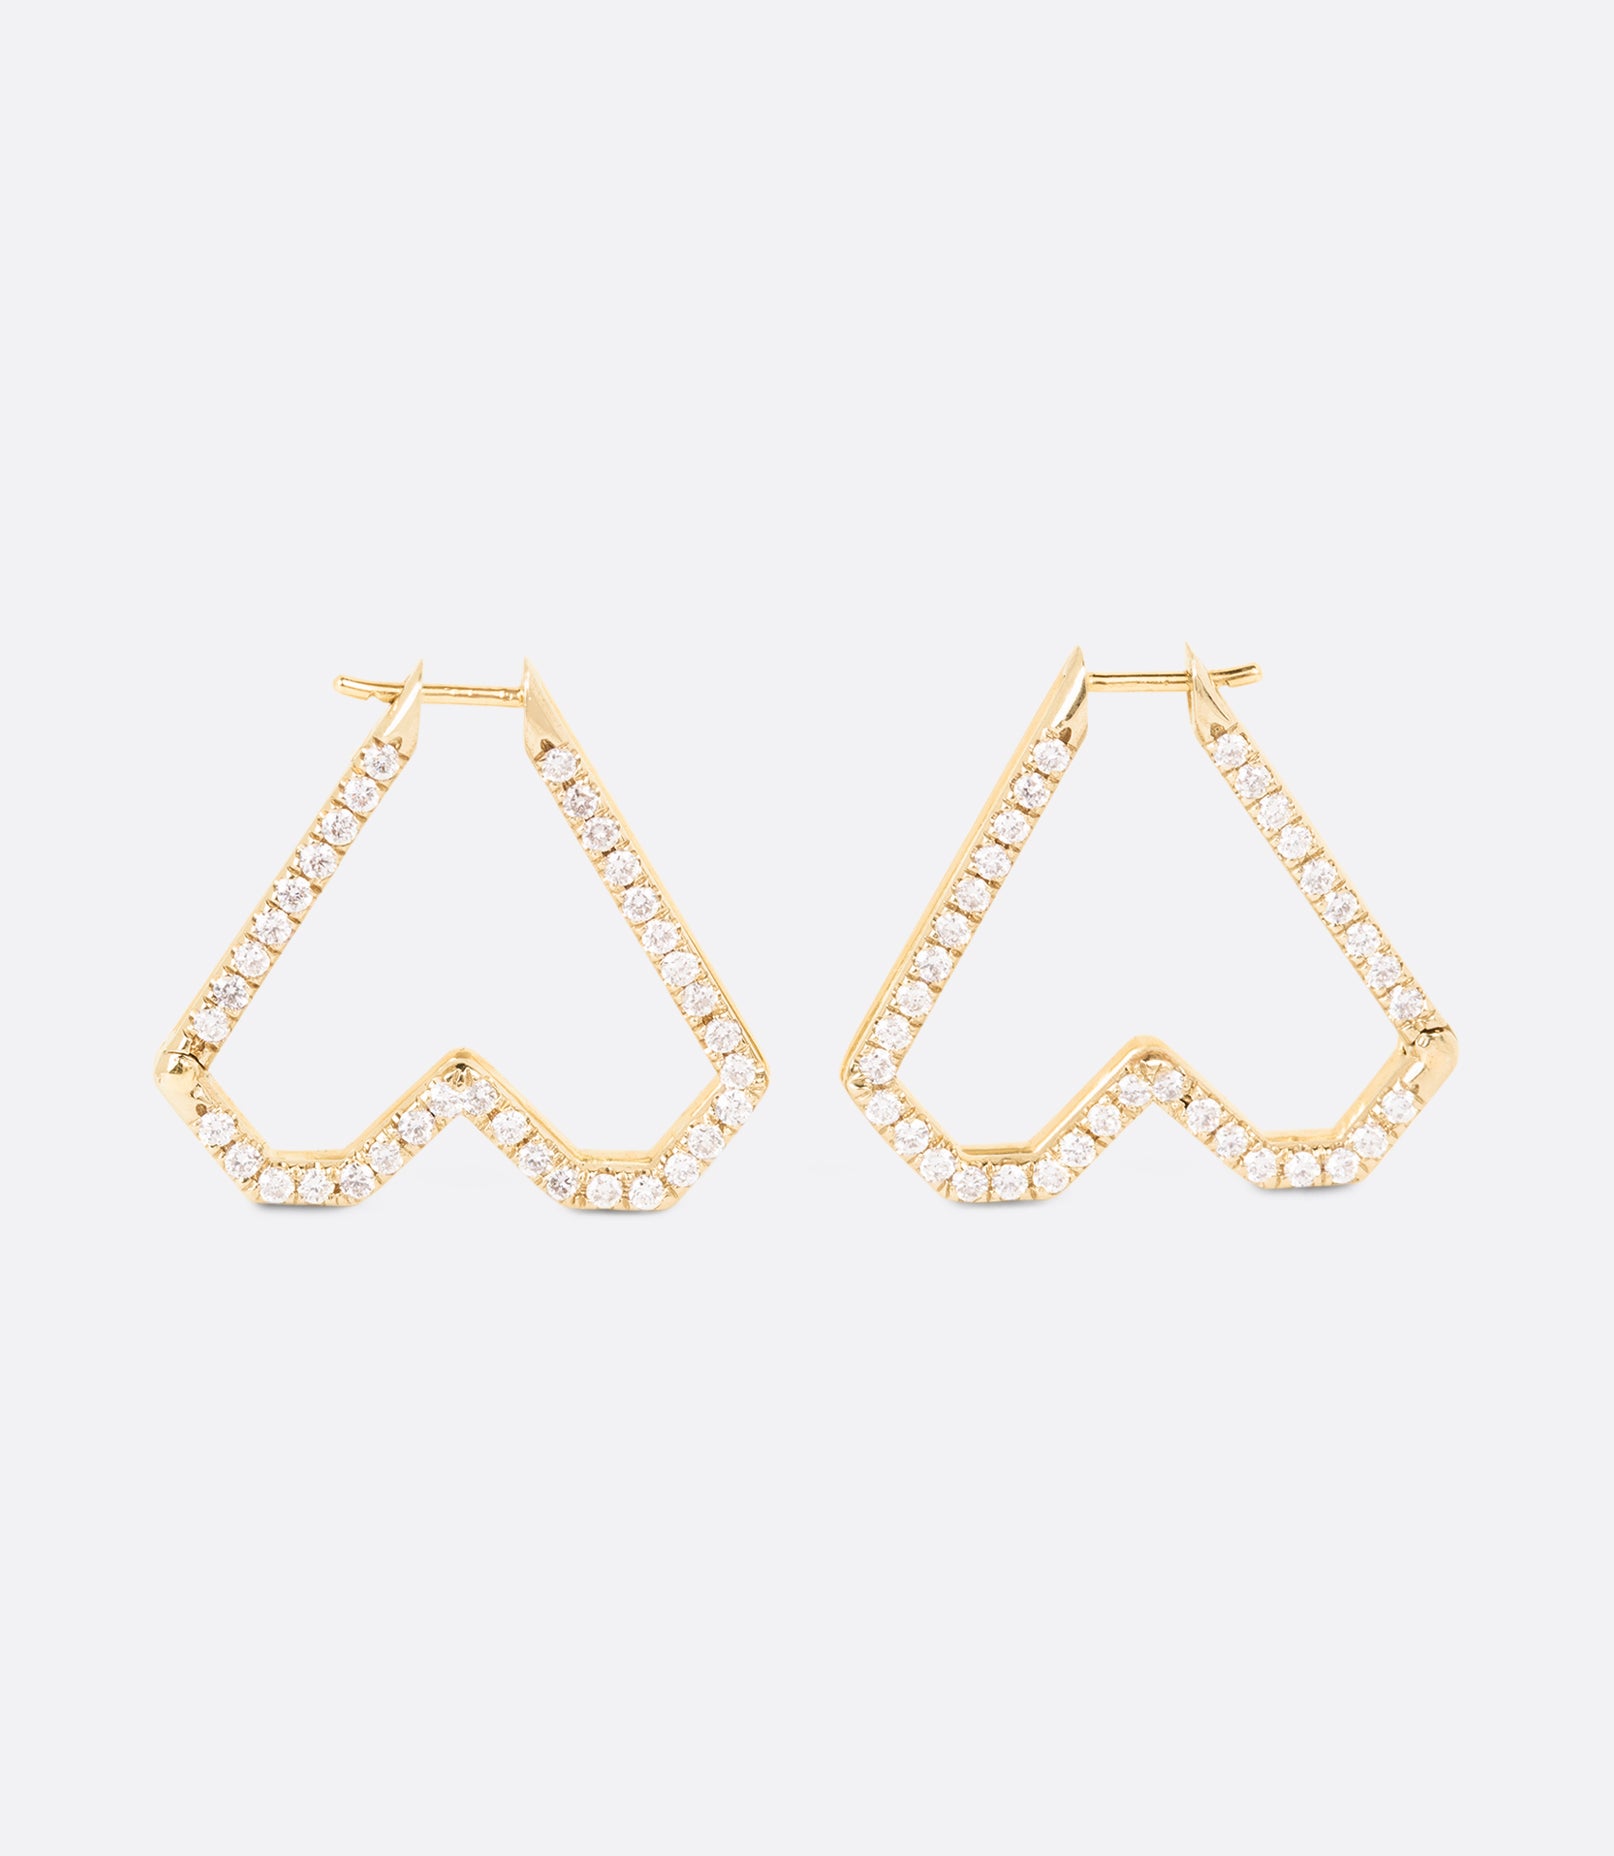 Two-tone 14k yellow and white gold heart hoops lined with beautiful pave diamonds.Two-tone 14k yellow and white gold heart hoops lined with beautiful pave diamonds.